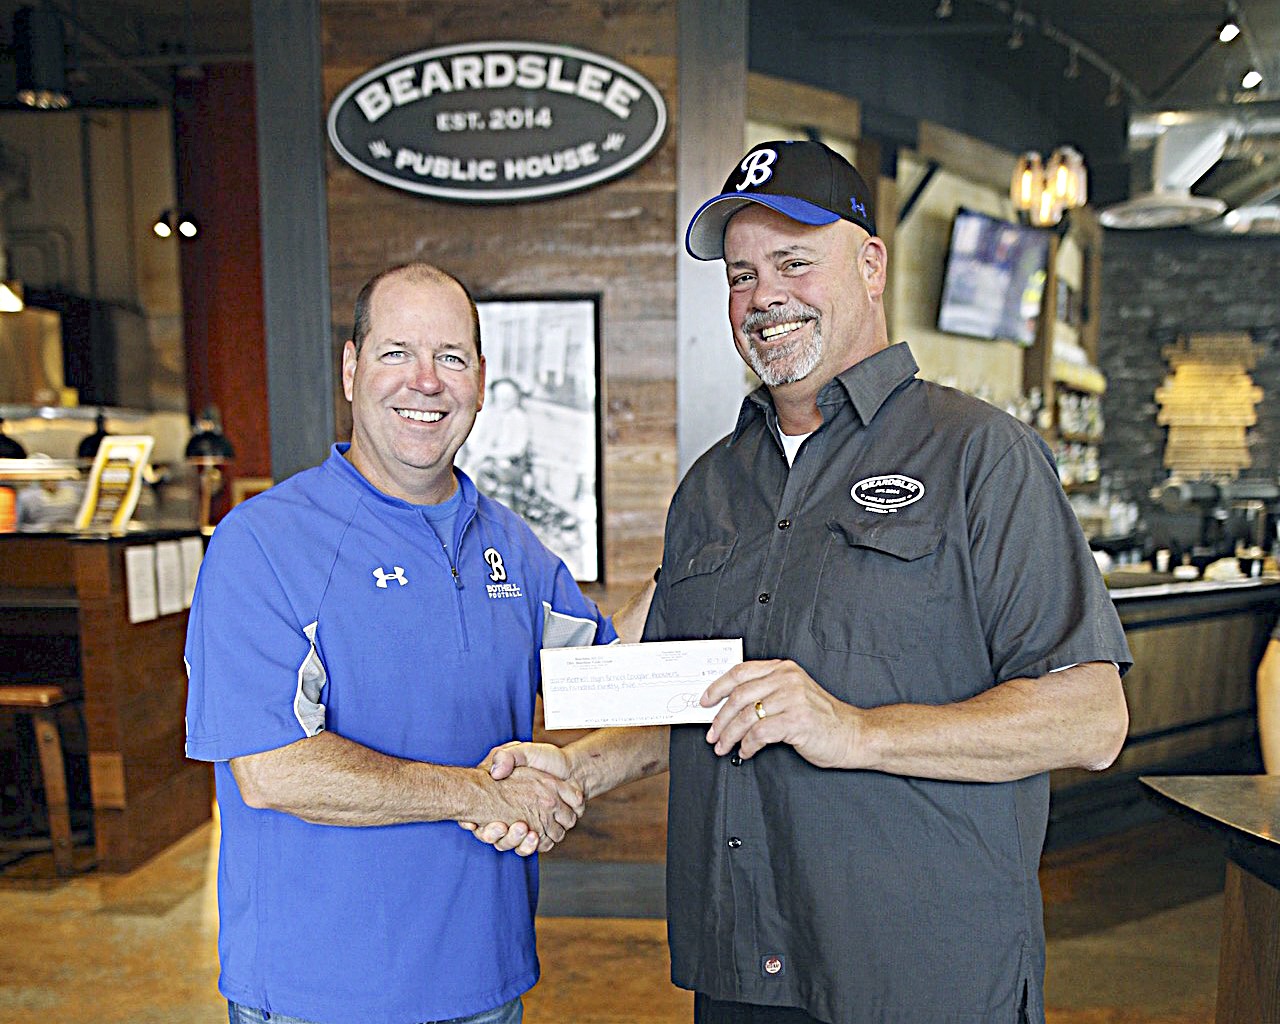 Bothell High School football coach Tom Bainter, left, and Chef John Howie. Contributed photo